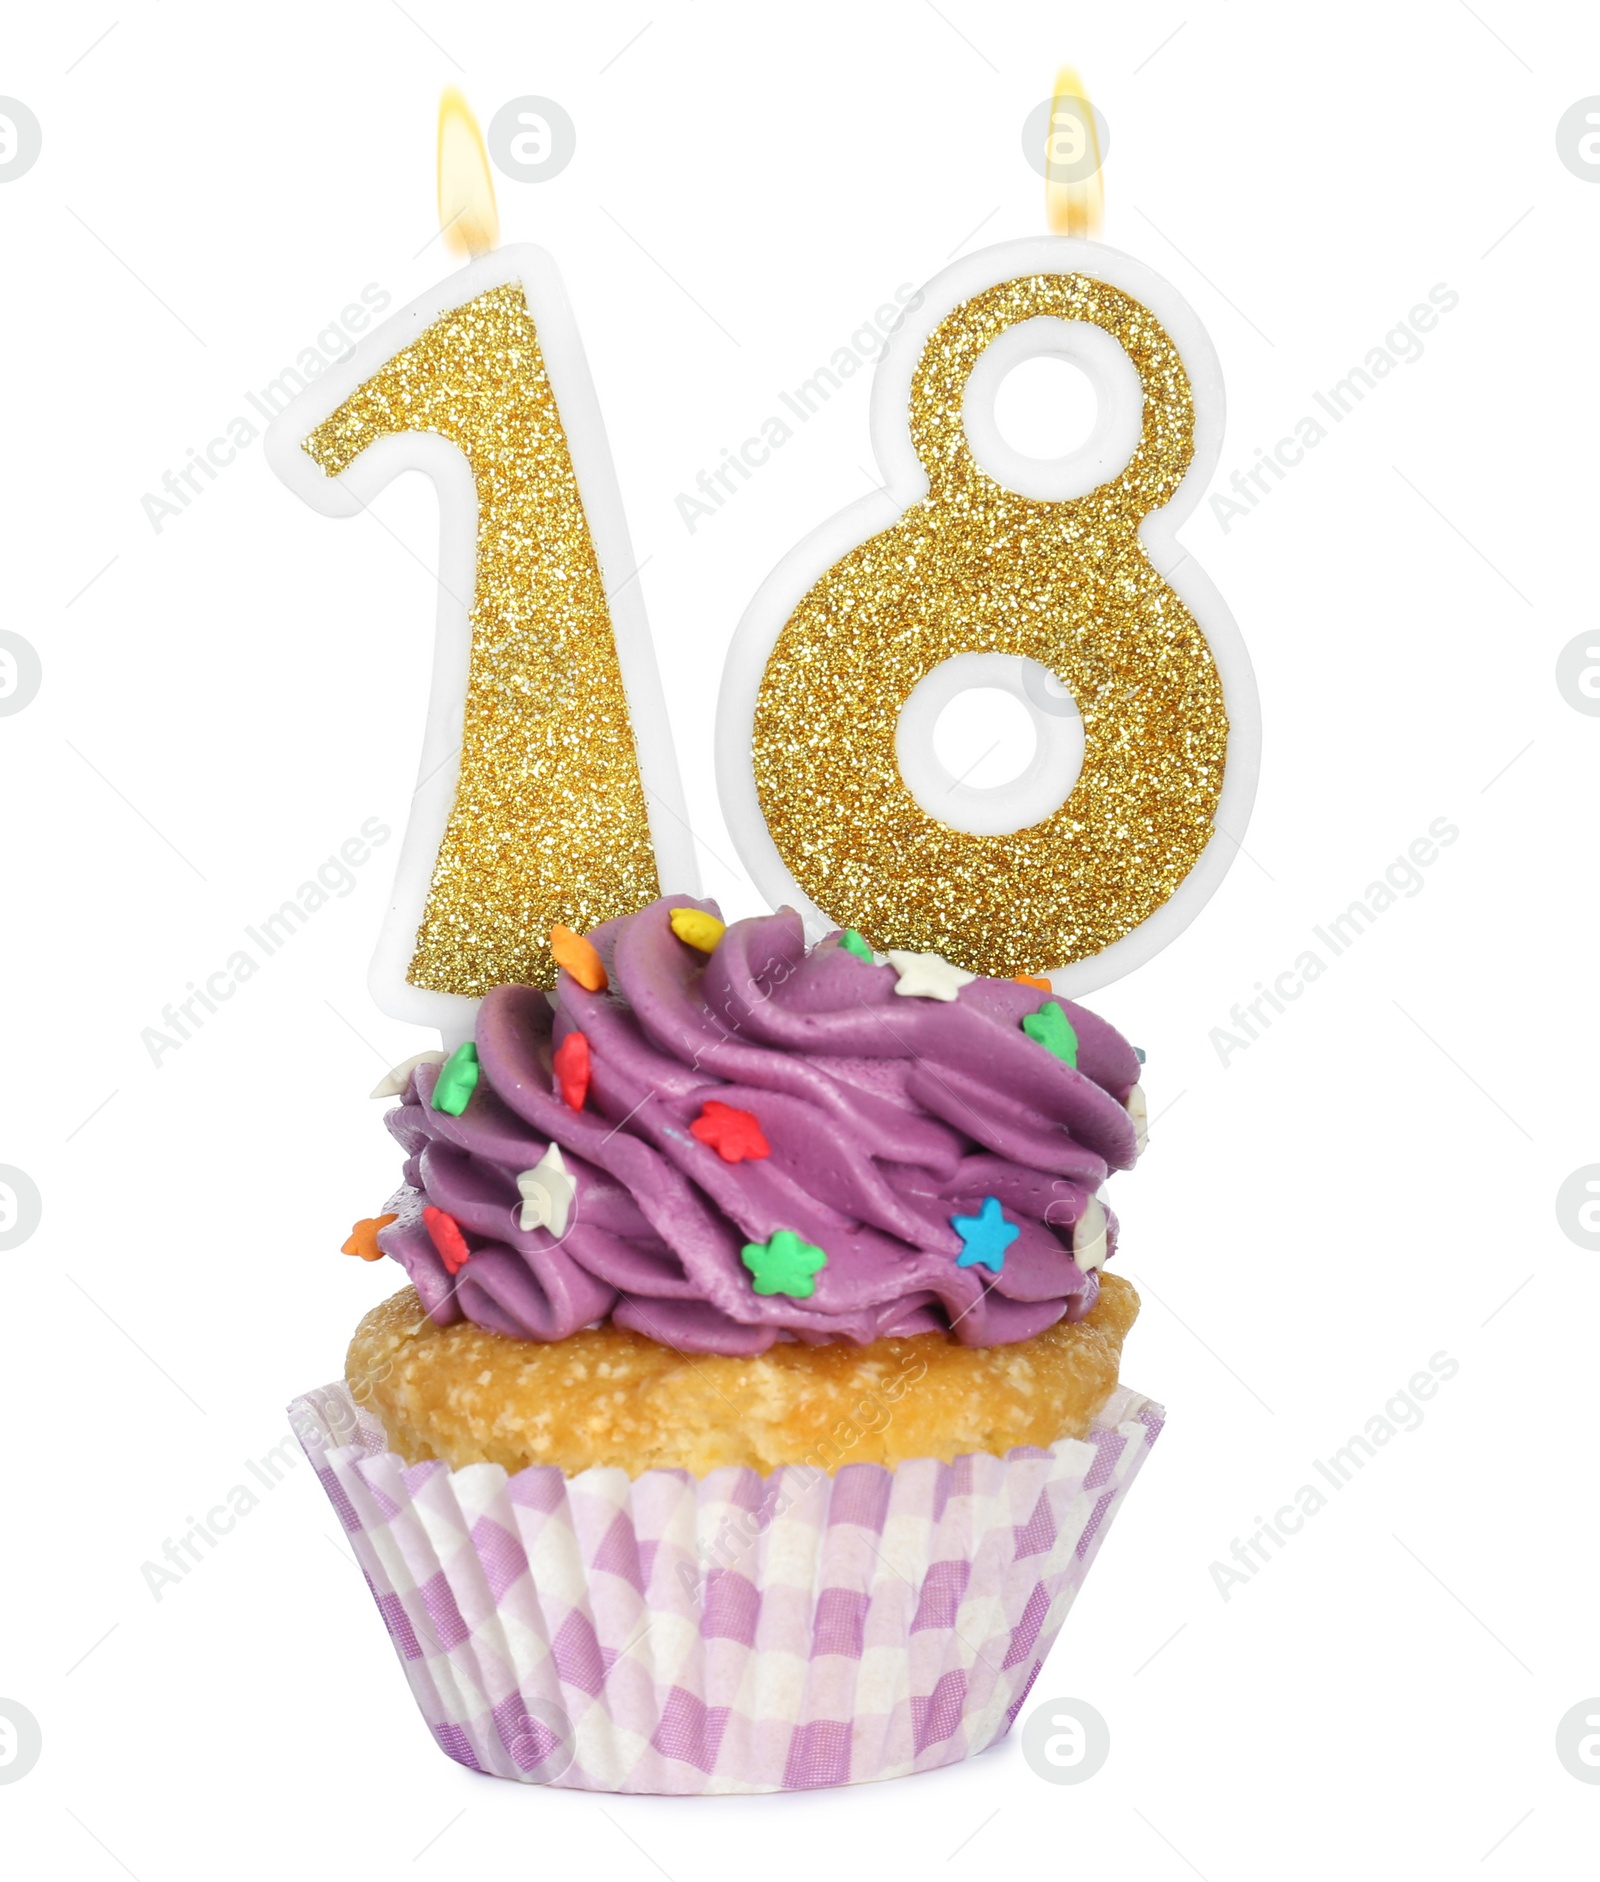 Photo of 18th birthday. Delicious cupcake with number shaped candles for coming of age party on white background